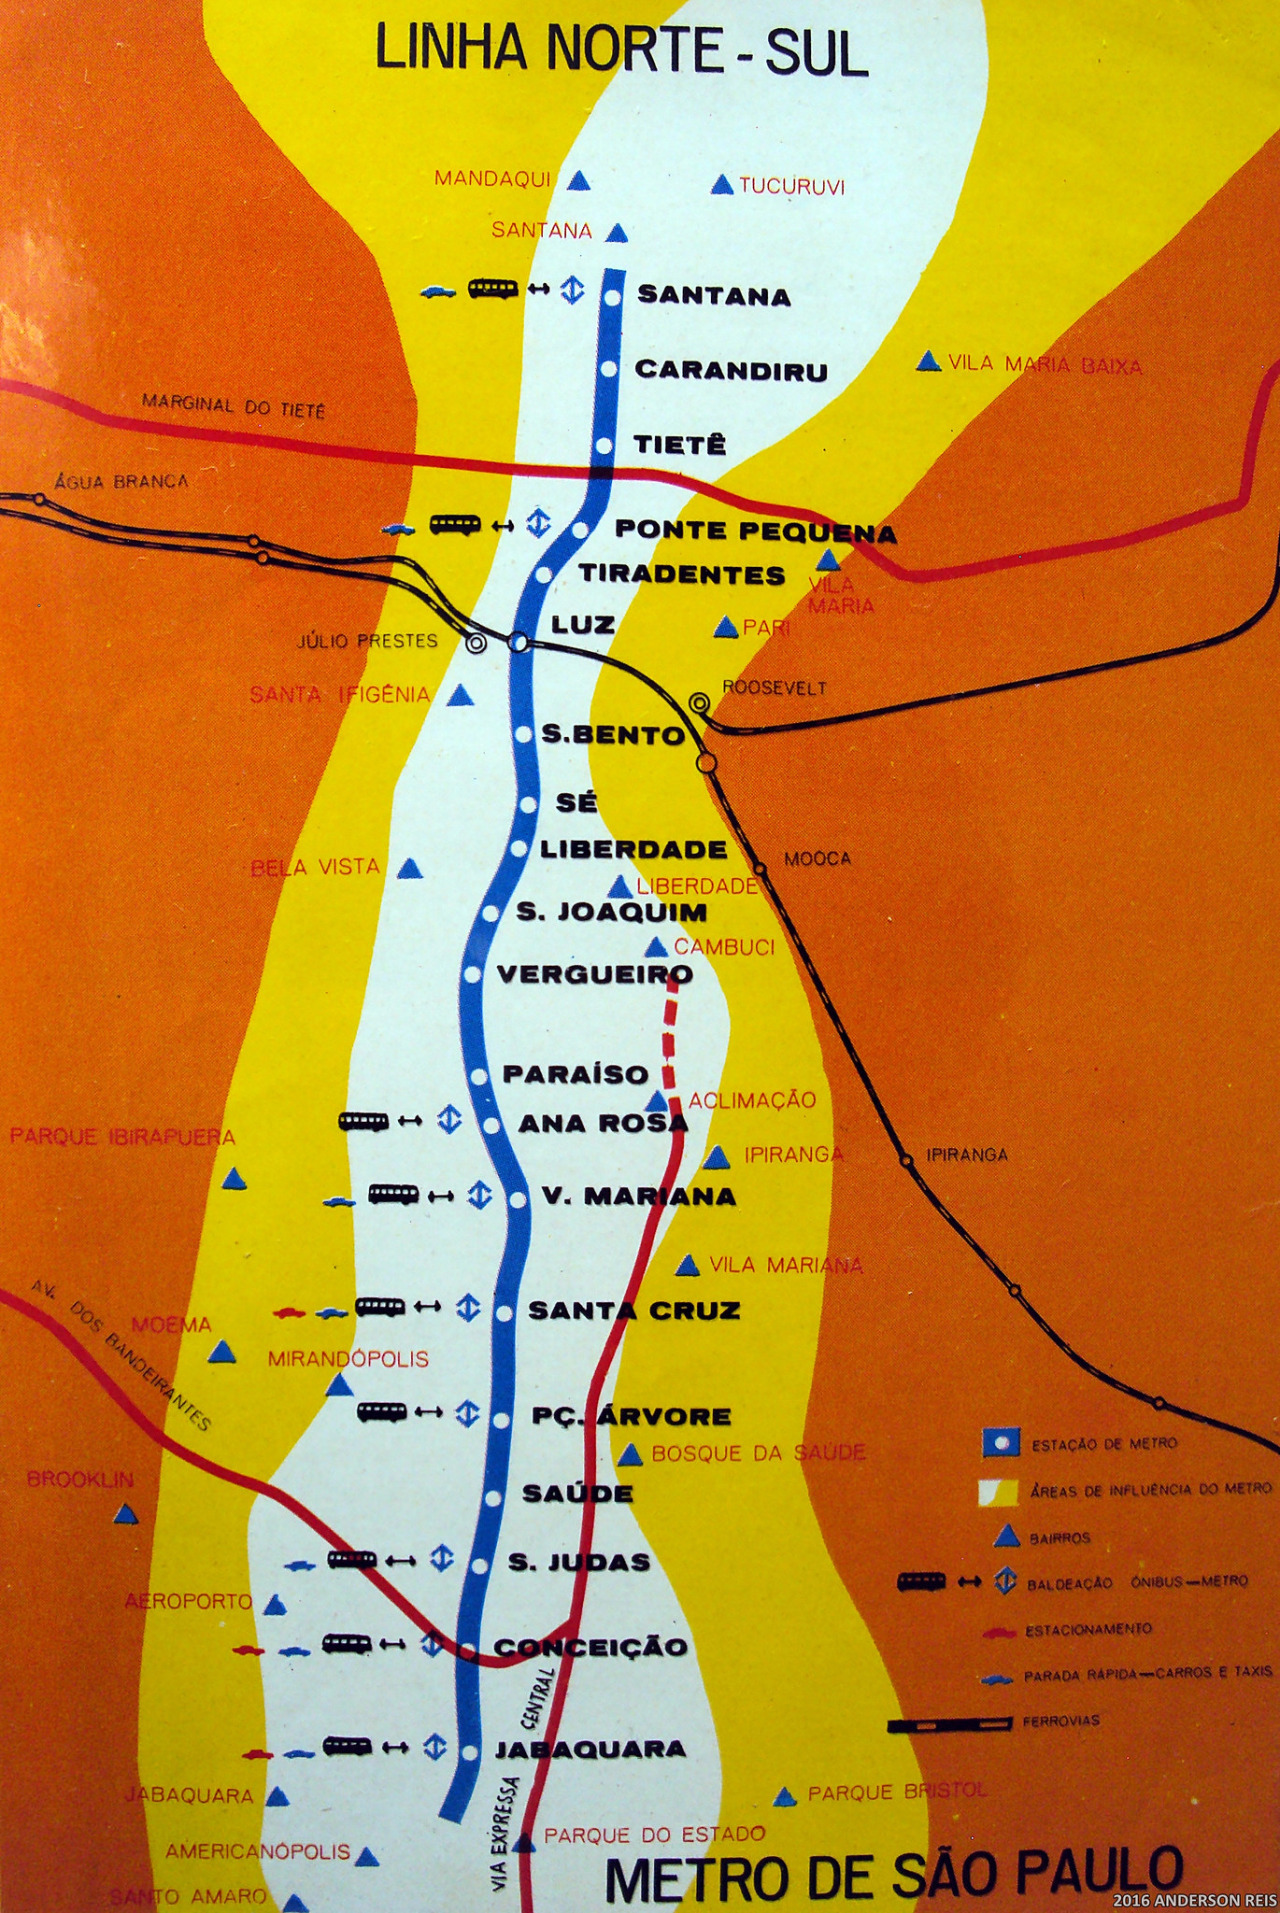 transitmaps:
“ Historical Map: Metro de São Paulo Linha Norte-Sul, c. 1973
Before it became Linha 1, the São Paulo Metro’s first line was simply called the North-South Line after its general alignment. Although the photographer on Flickr dates it to...